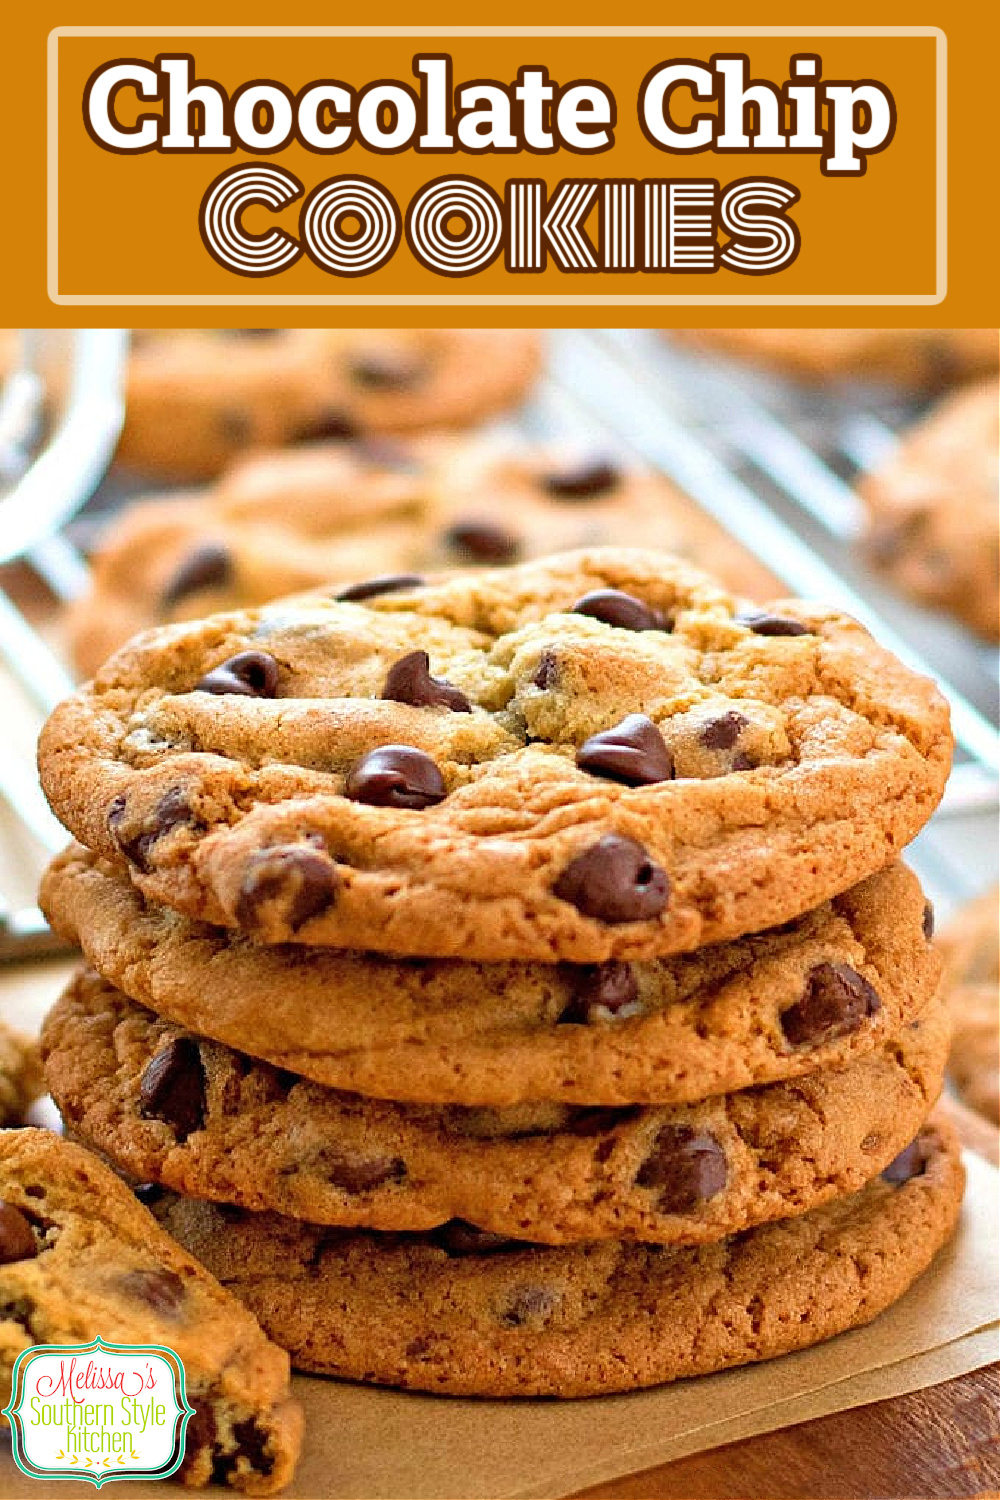 The king of all cookies these homemade Chocolate Chip Cookies never last long in your cookie jar #chocolatechipcookies #chocolate #bestcookierecipes #chocolatechipcookierecipe #holidaybaking #chocolatecookies #southernrecipes #southernfood #Christmascookies #desserts #dessertfoodrecipes